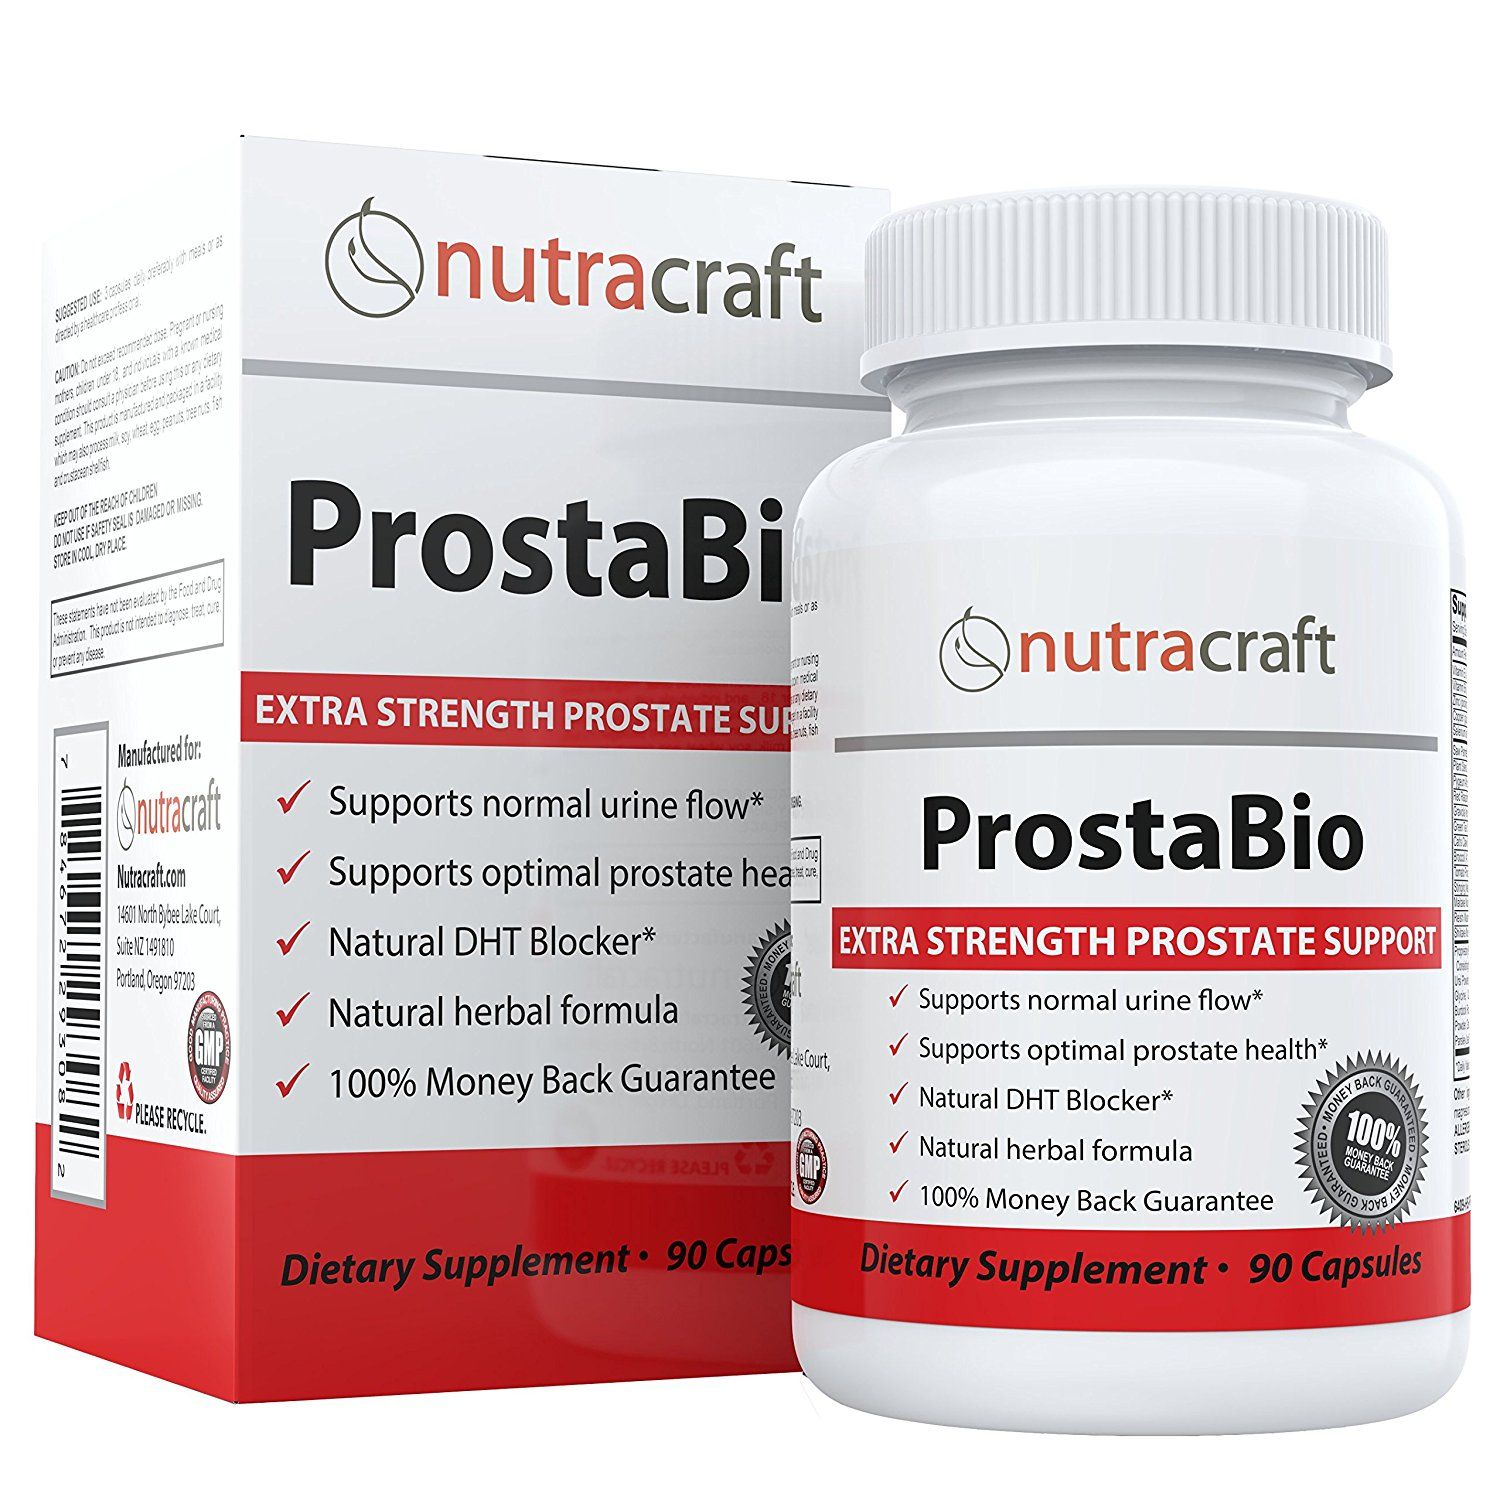 Awesome Top 10 Best Super Prostate Health Supplements in 2017 Reviews ...